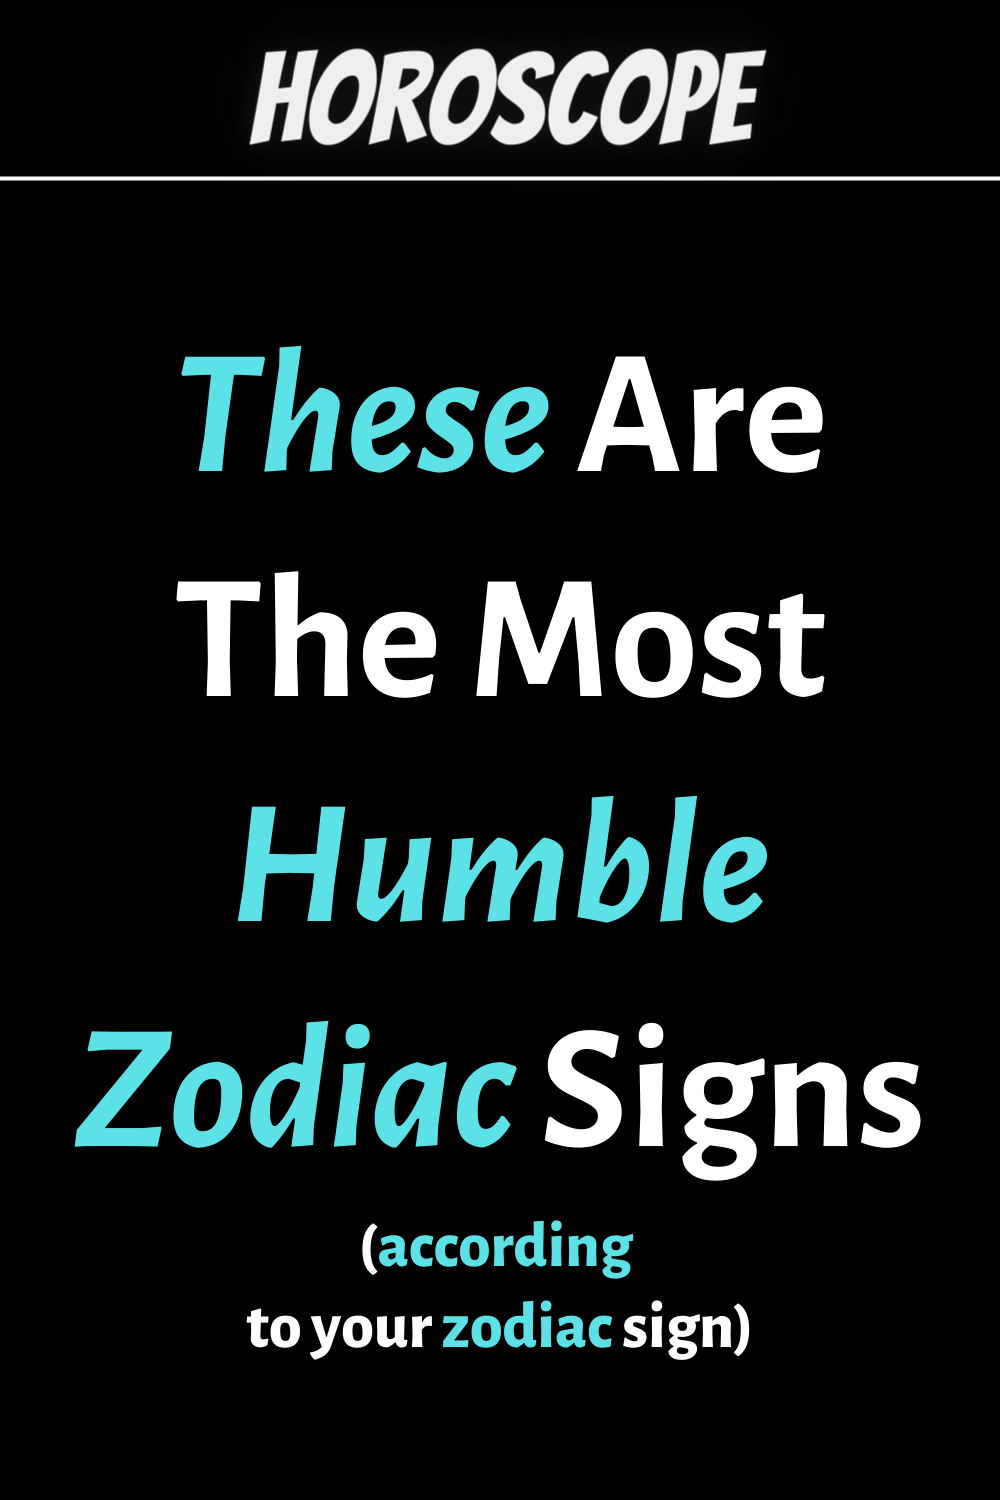 These Are The Most Humble Zodiac Signs